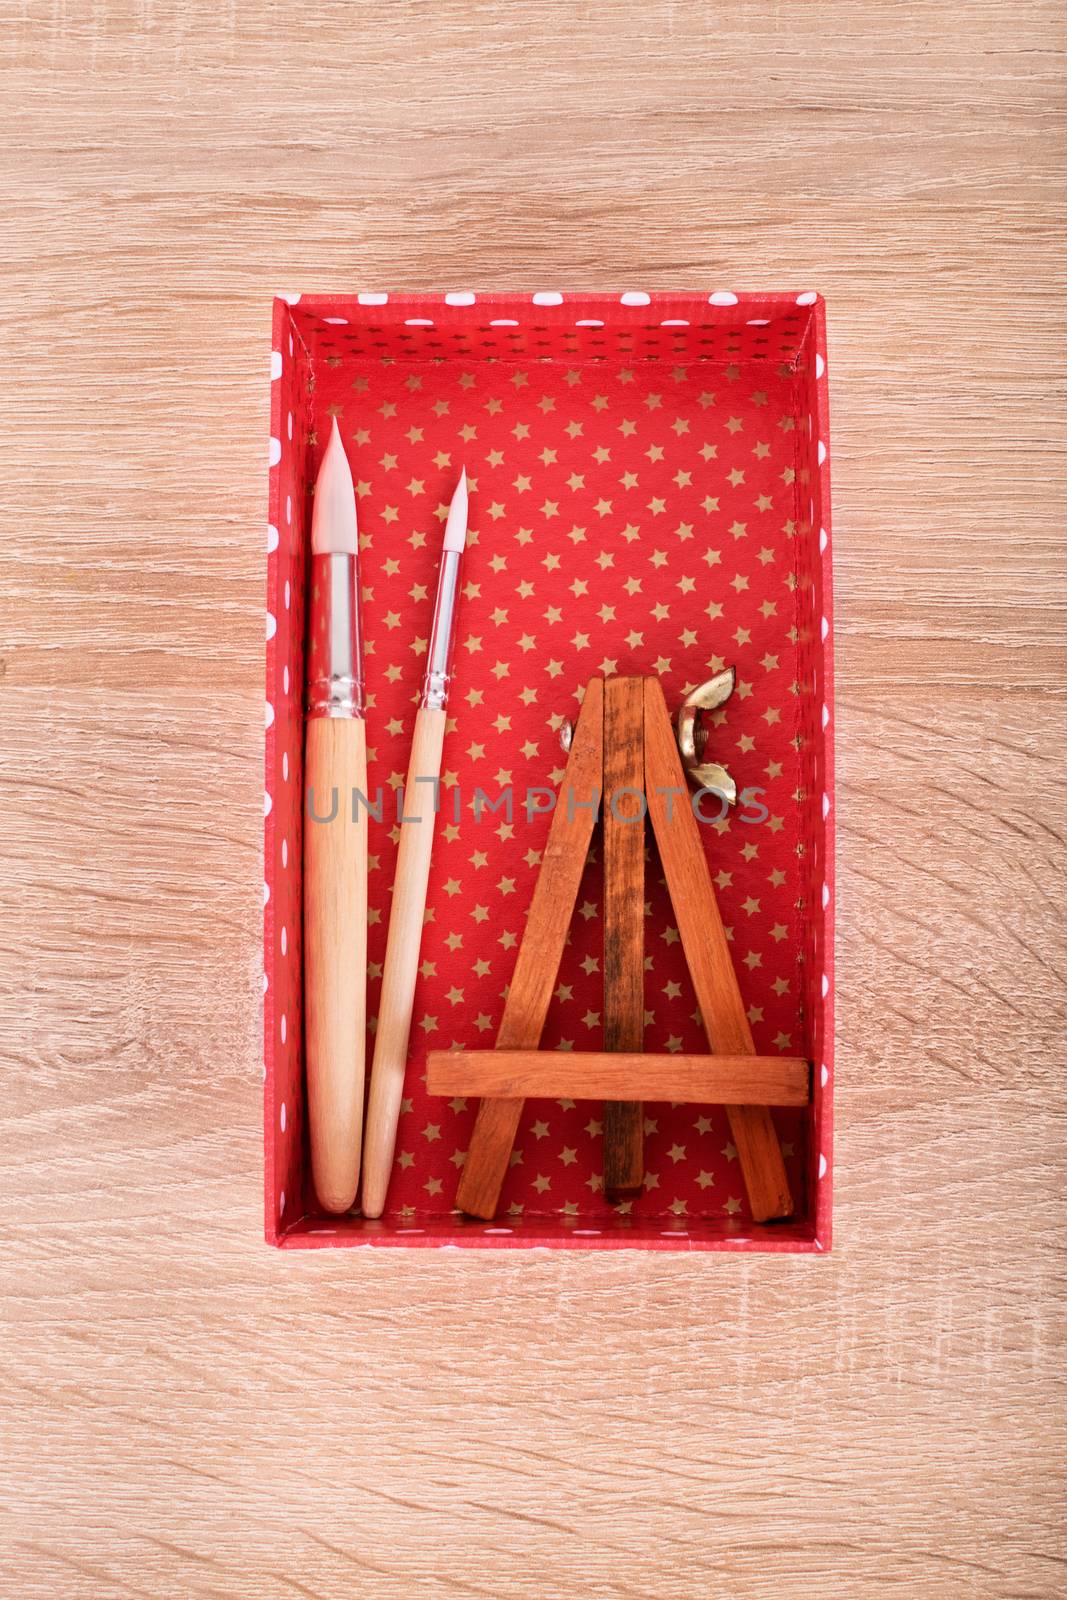 Paint brushes and easel in a box by Mendelex